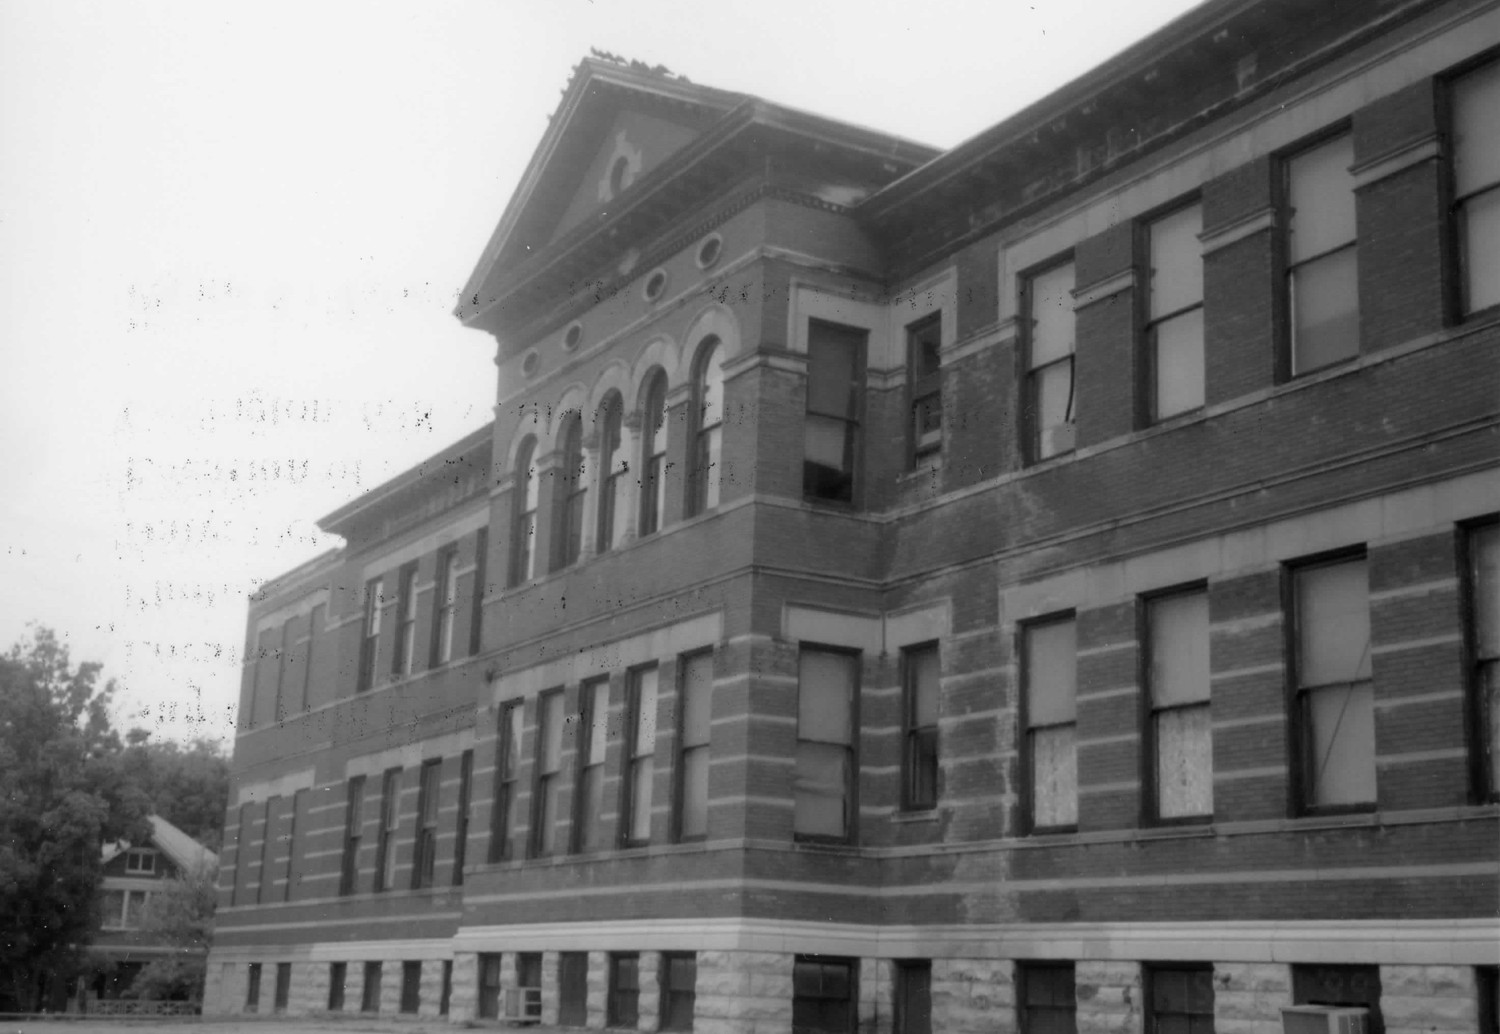 Fifth District School, Covington Kentucky South elevation, facing northwest (2004)